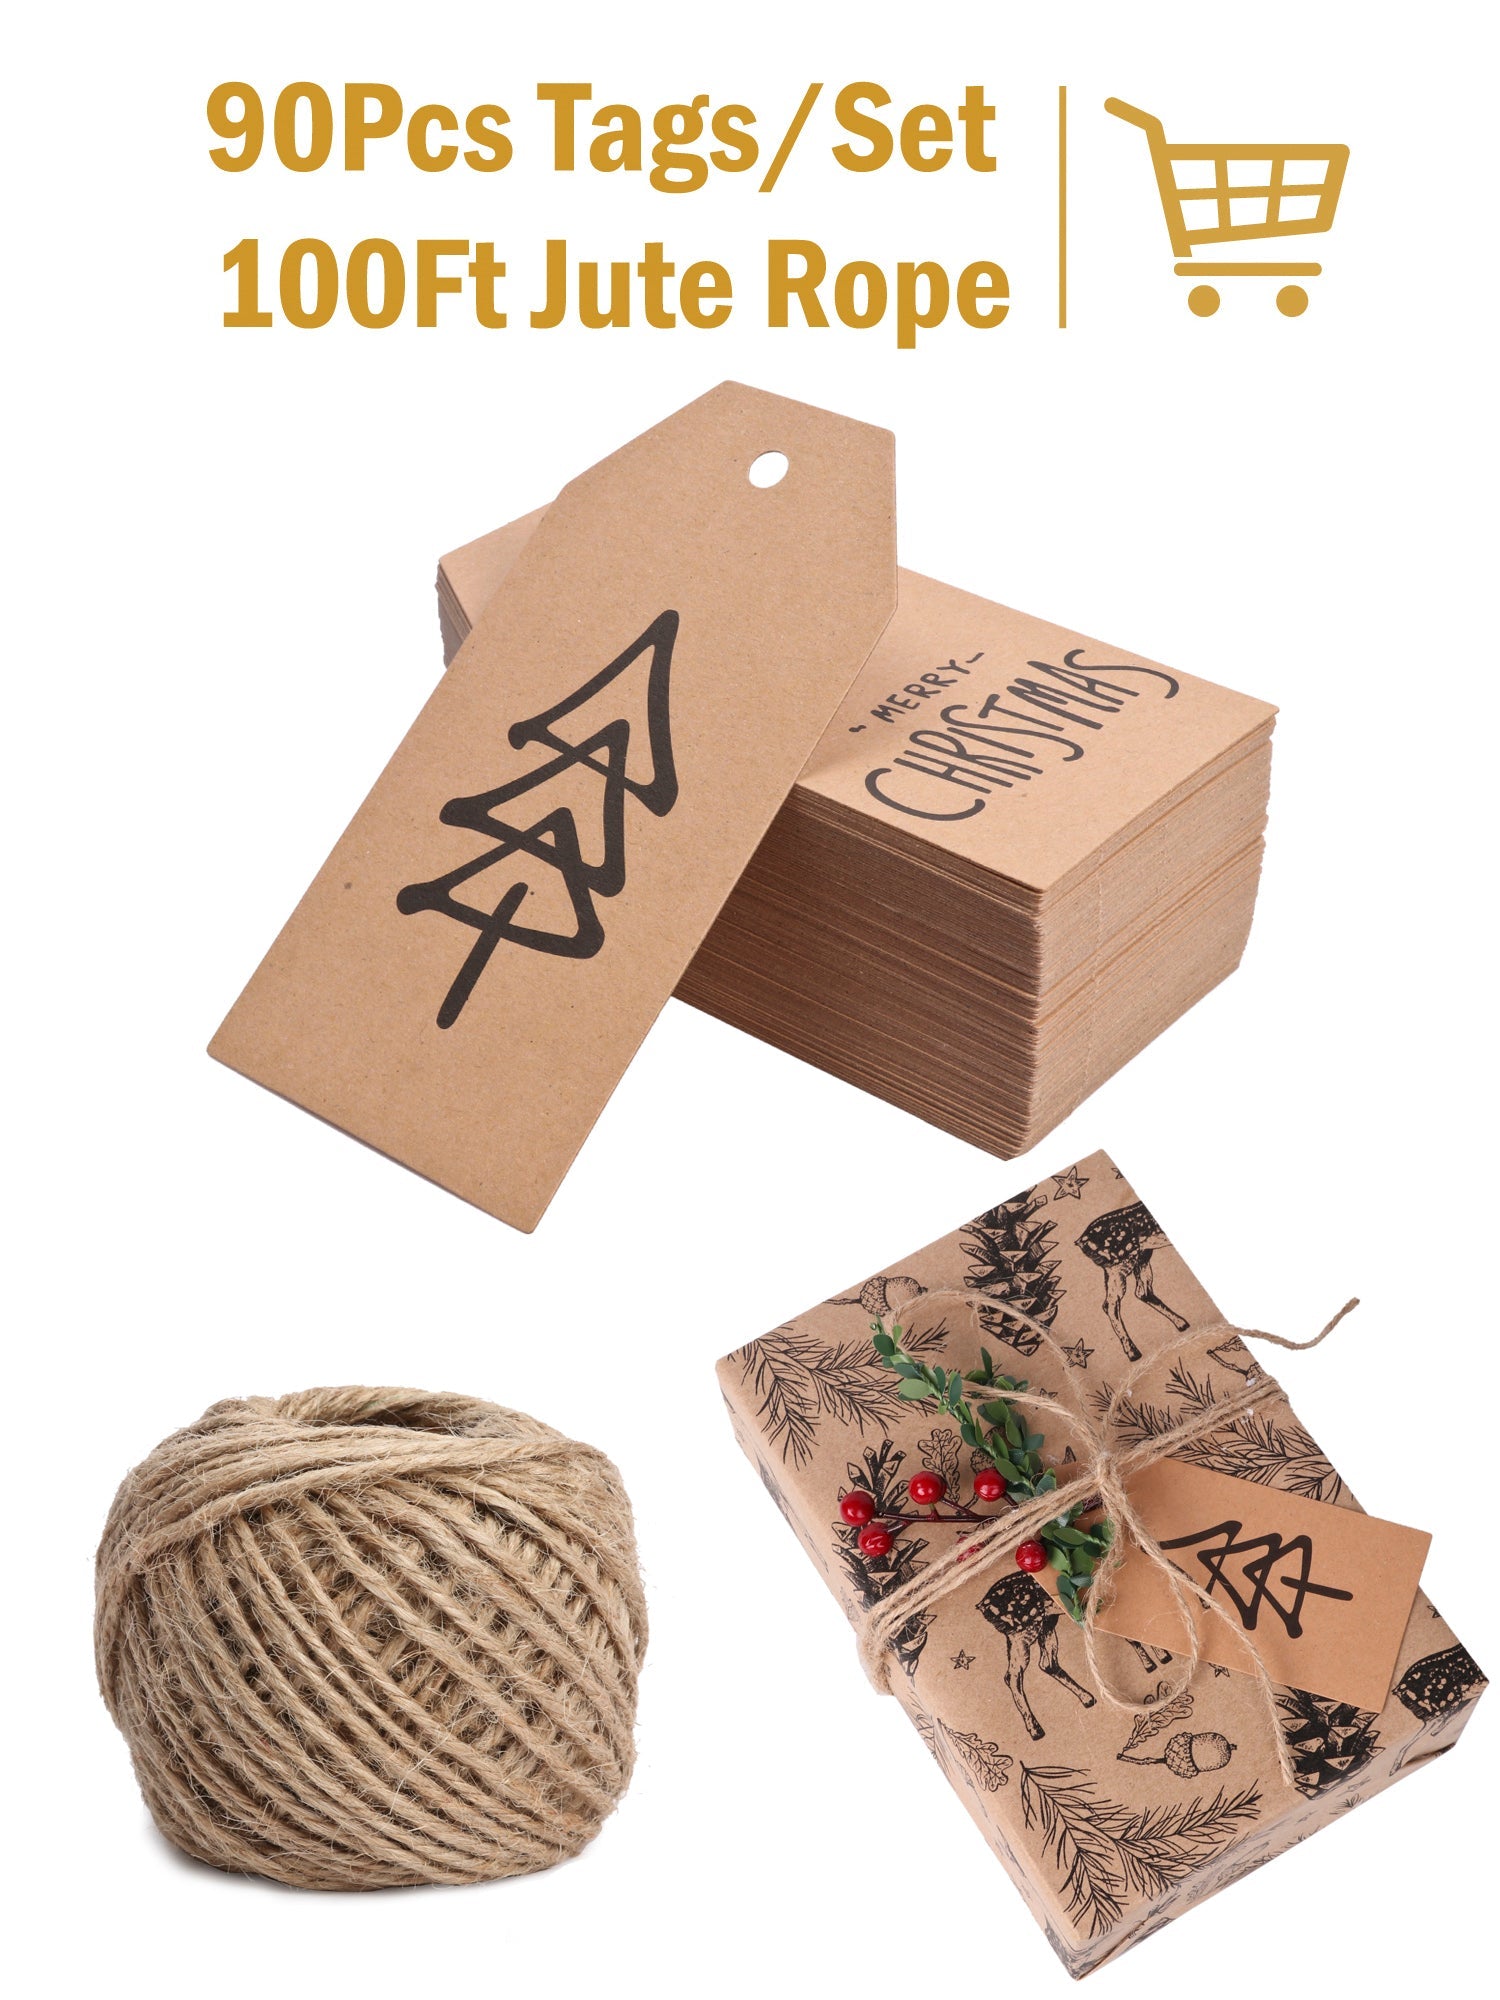 90Pcs Christmas Brown Kraft Paper Gifts Tags with 100 Ft Natural Jute Twine